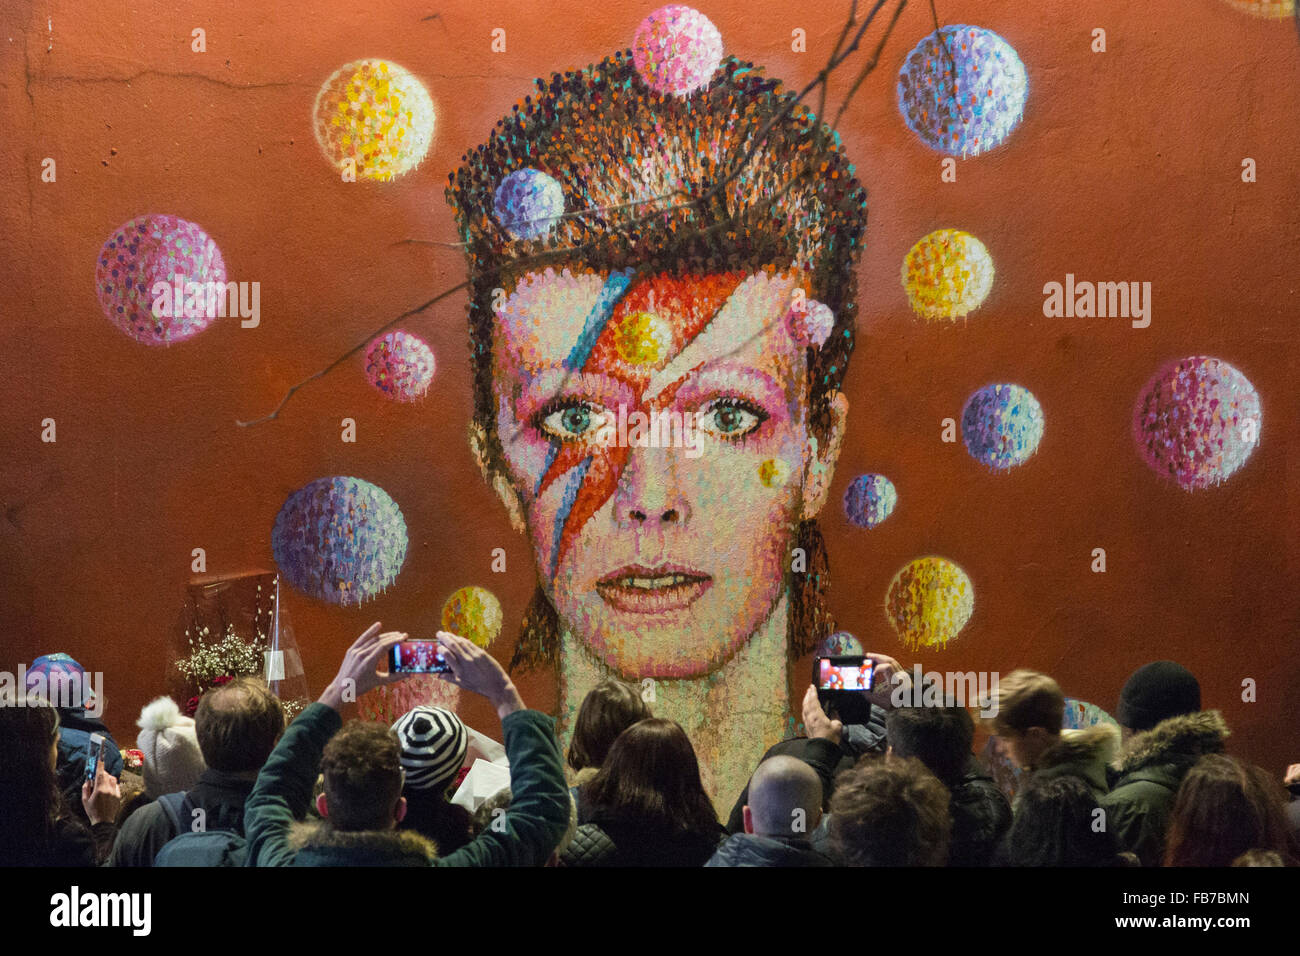 London, UK. 11 January 2016. Fans hold a vigil at the David Bowie mural in Brixton to lay flowers and leave messages. Tributes to David Bowie (1947-2016) who passed away on 10 January 2016. Credit:  Nick Savage/Alamy Live News Stock Photo